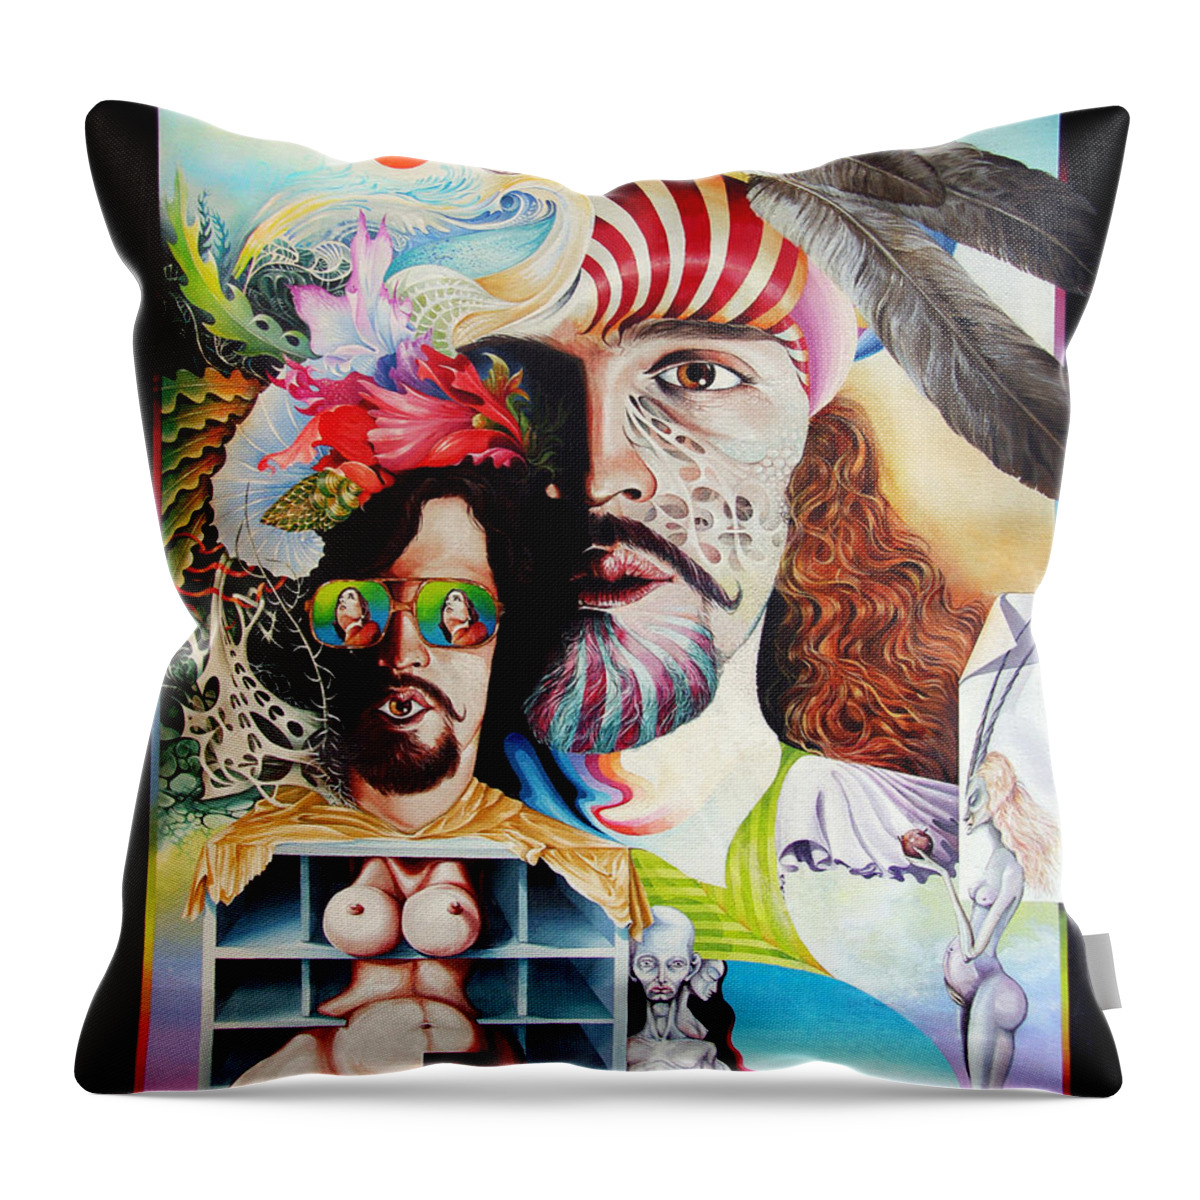 Surrealism Throw Pillow featuring the painting Selfportrait With The Critical Eye by Otto Rapp